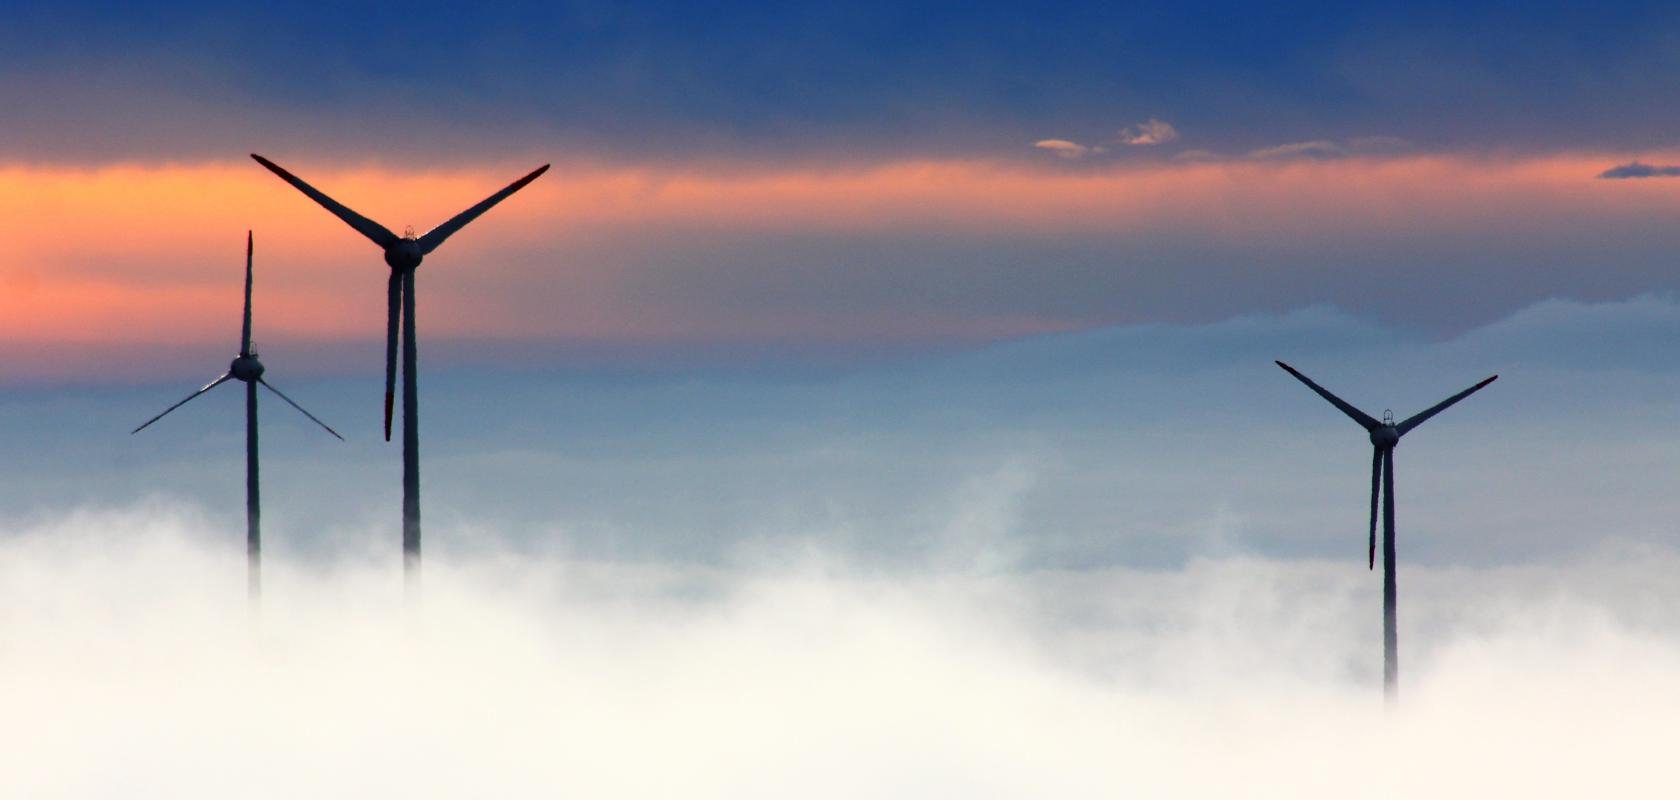 Due to the harsh environments in which they operate, wind turbines can incur high maintenance costs. (Image: Pexels/Pixabay)